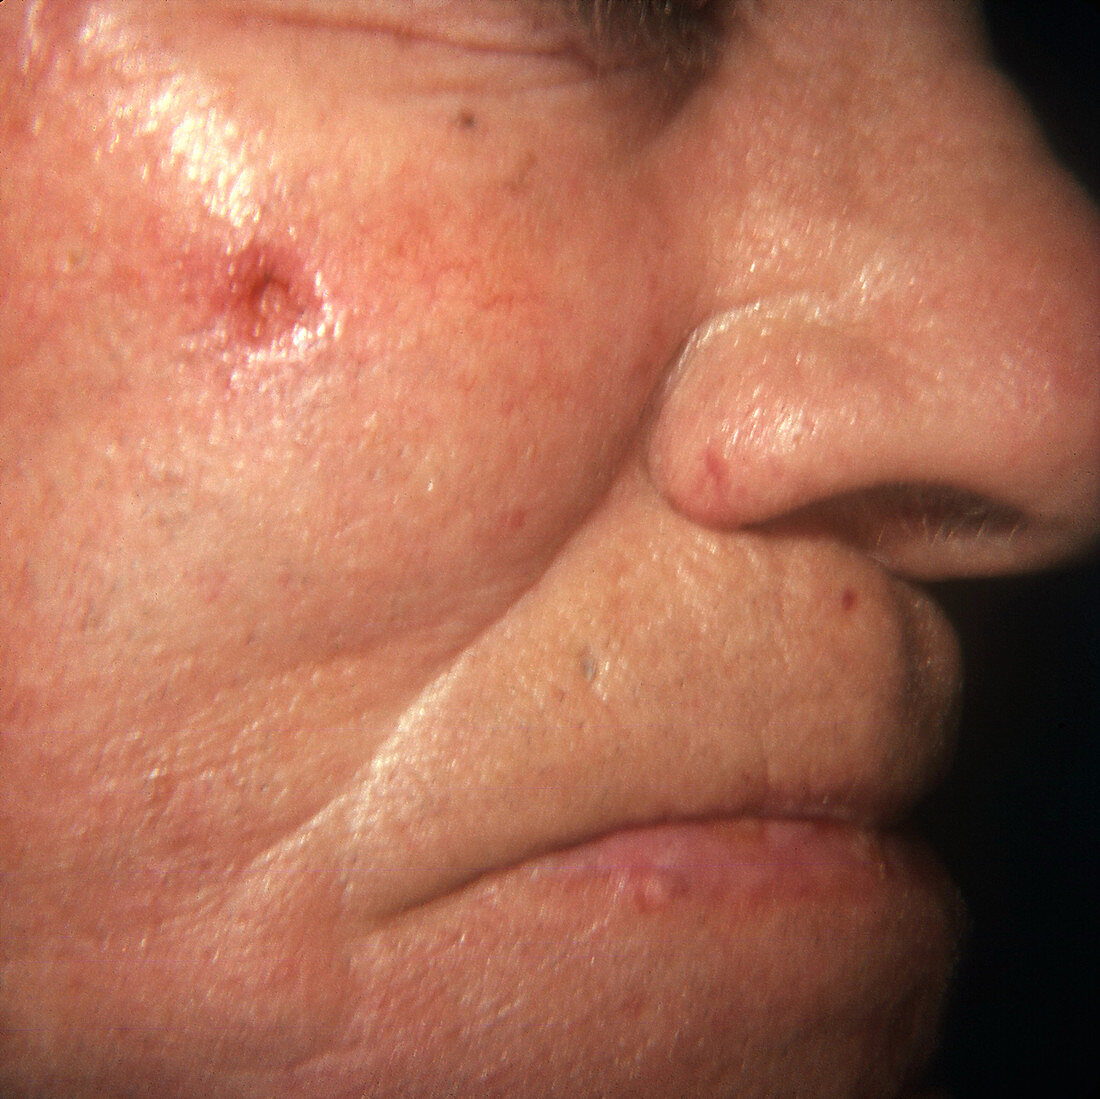 Rodent Ulcer on Patient's Cheek